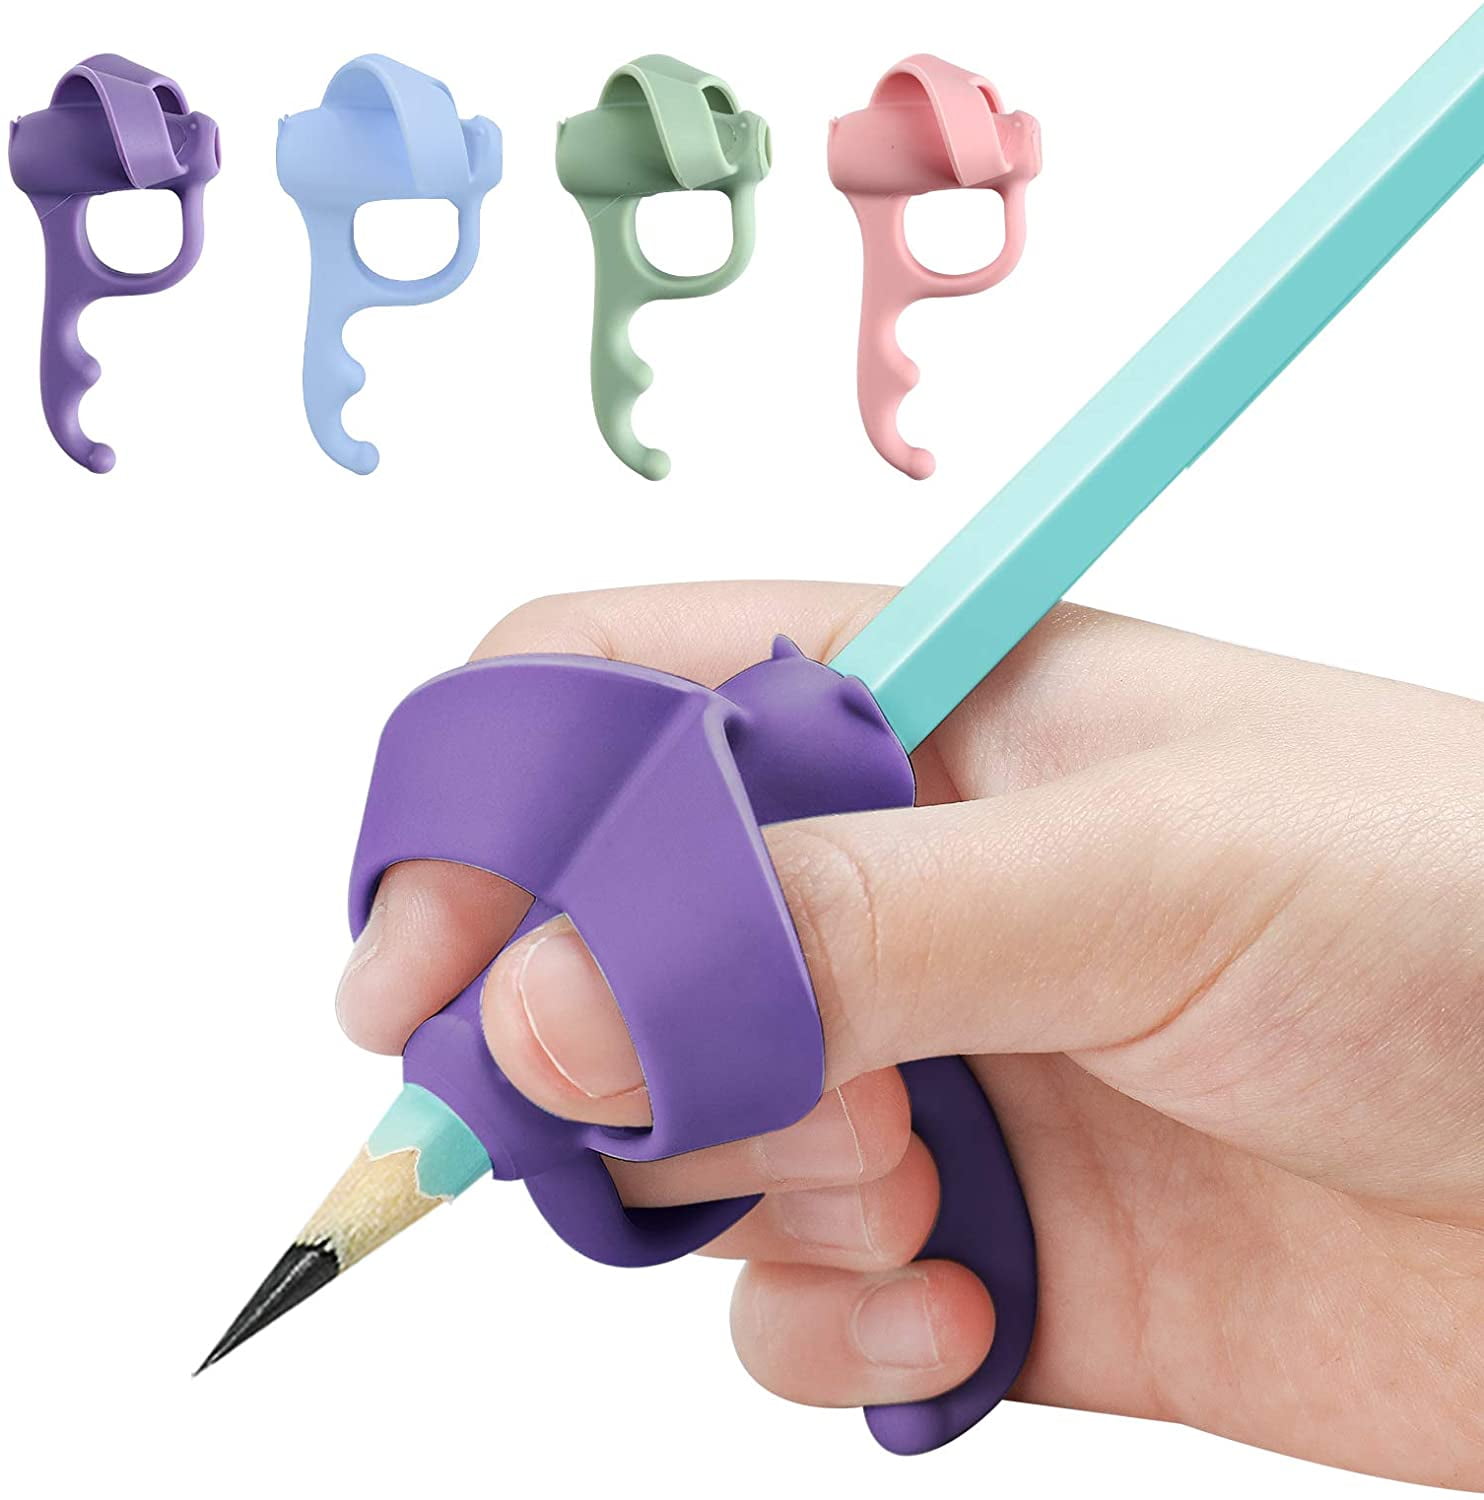 10/50pcs Silicone Pencil Holder Ergonomic Pen Grippers Writing Aid For Kids 